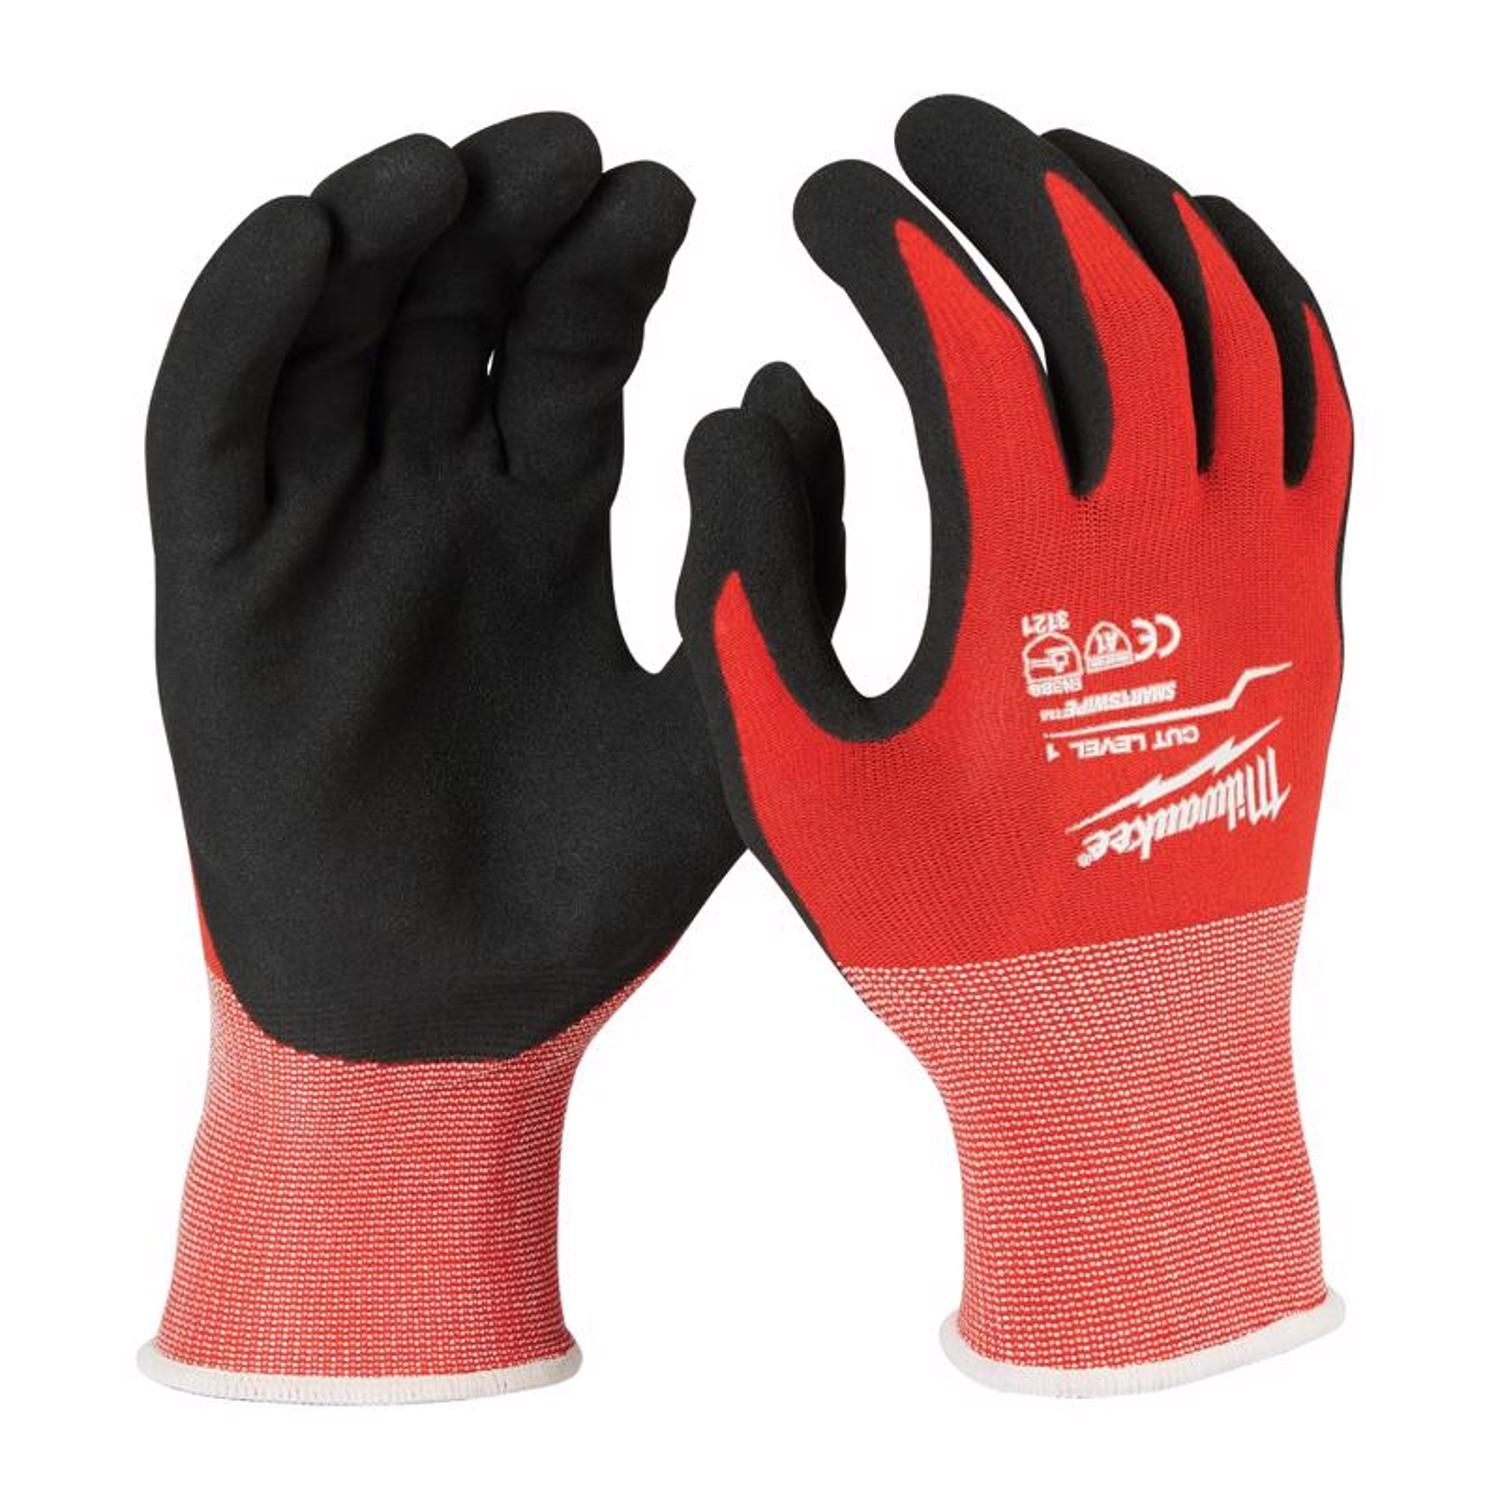 Photos - Safety Equipment Milwaukee Cut Level 1 Nitrile Dipped Cut Resistant Gloves Red XL 1 pair 48 